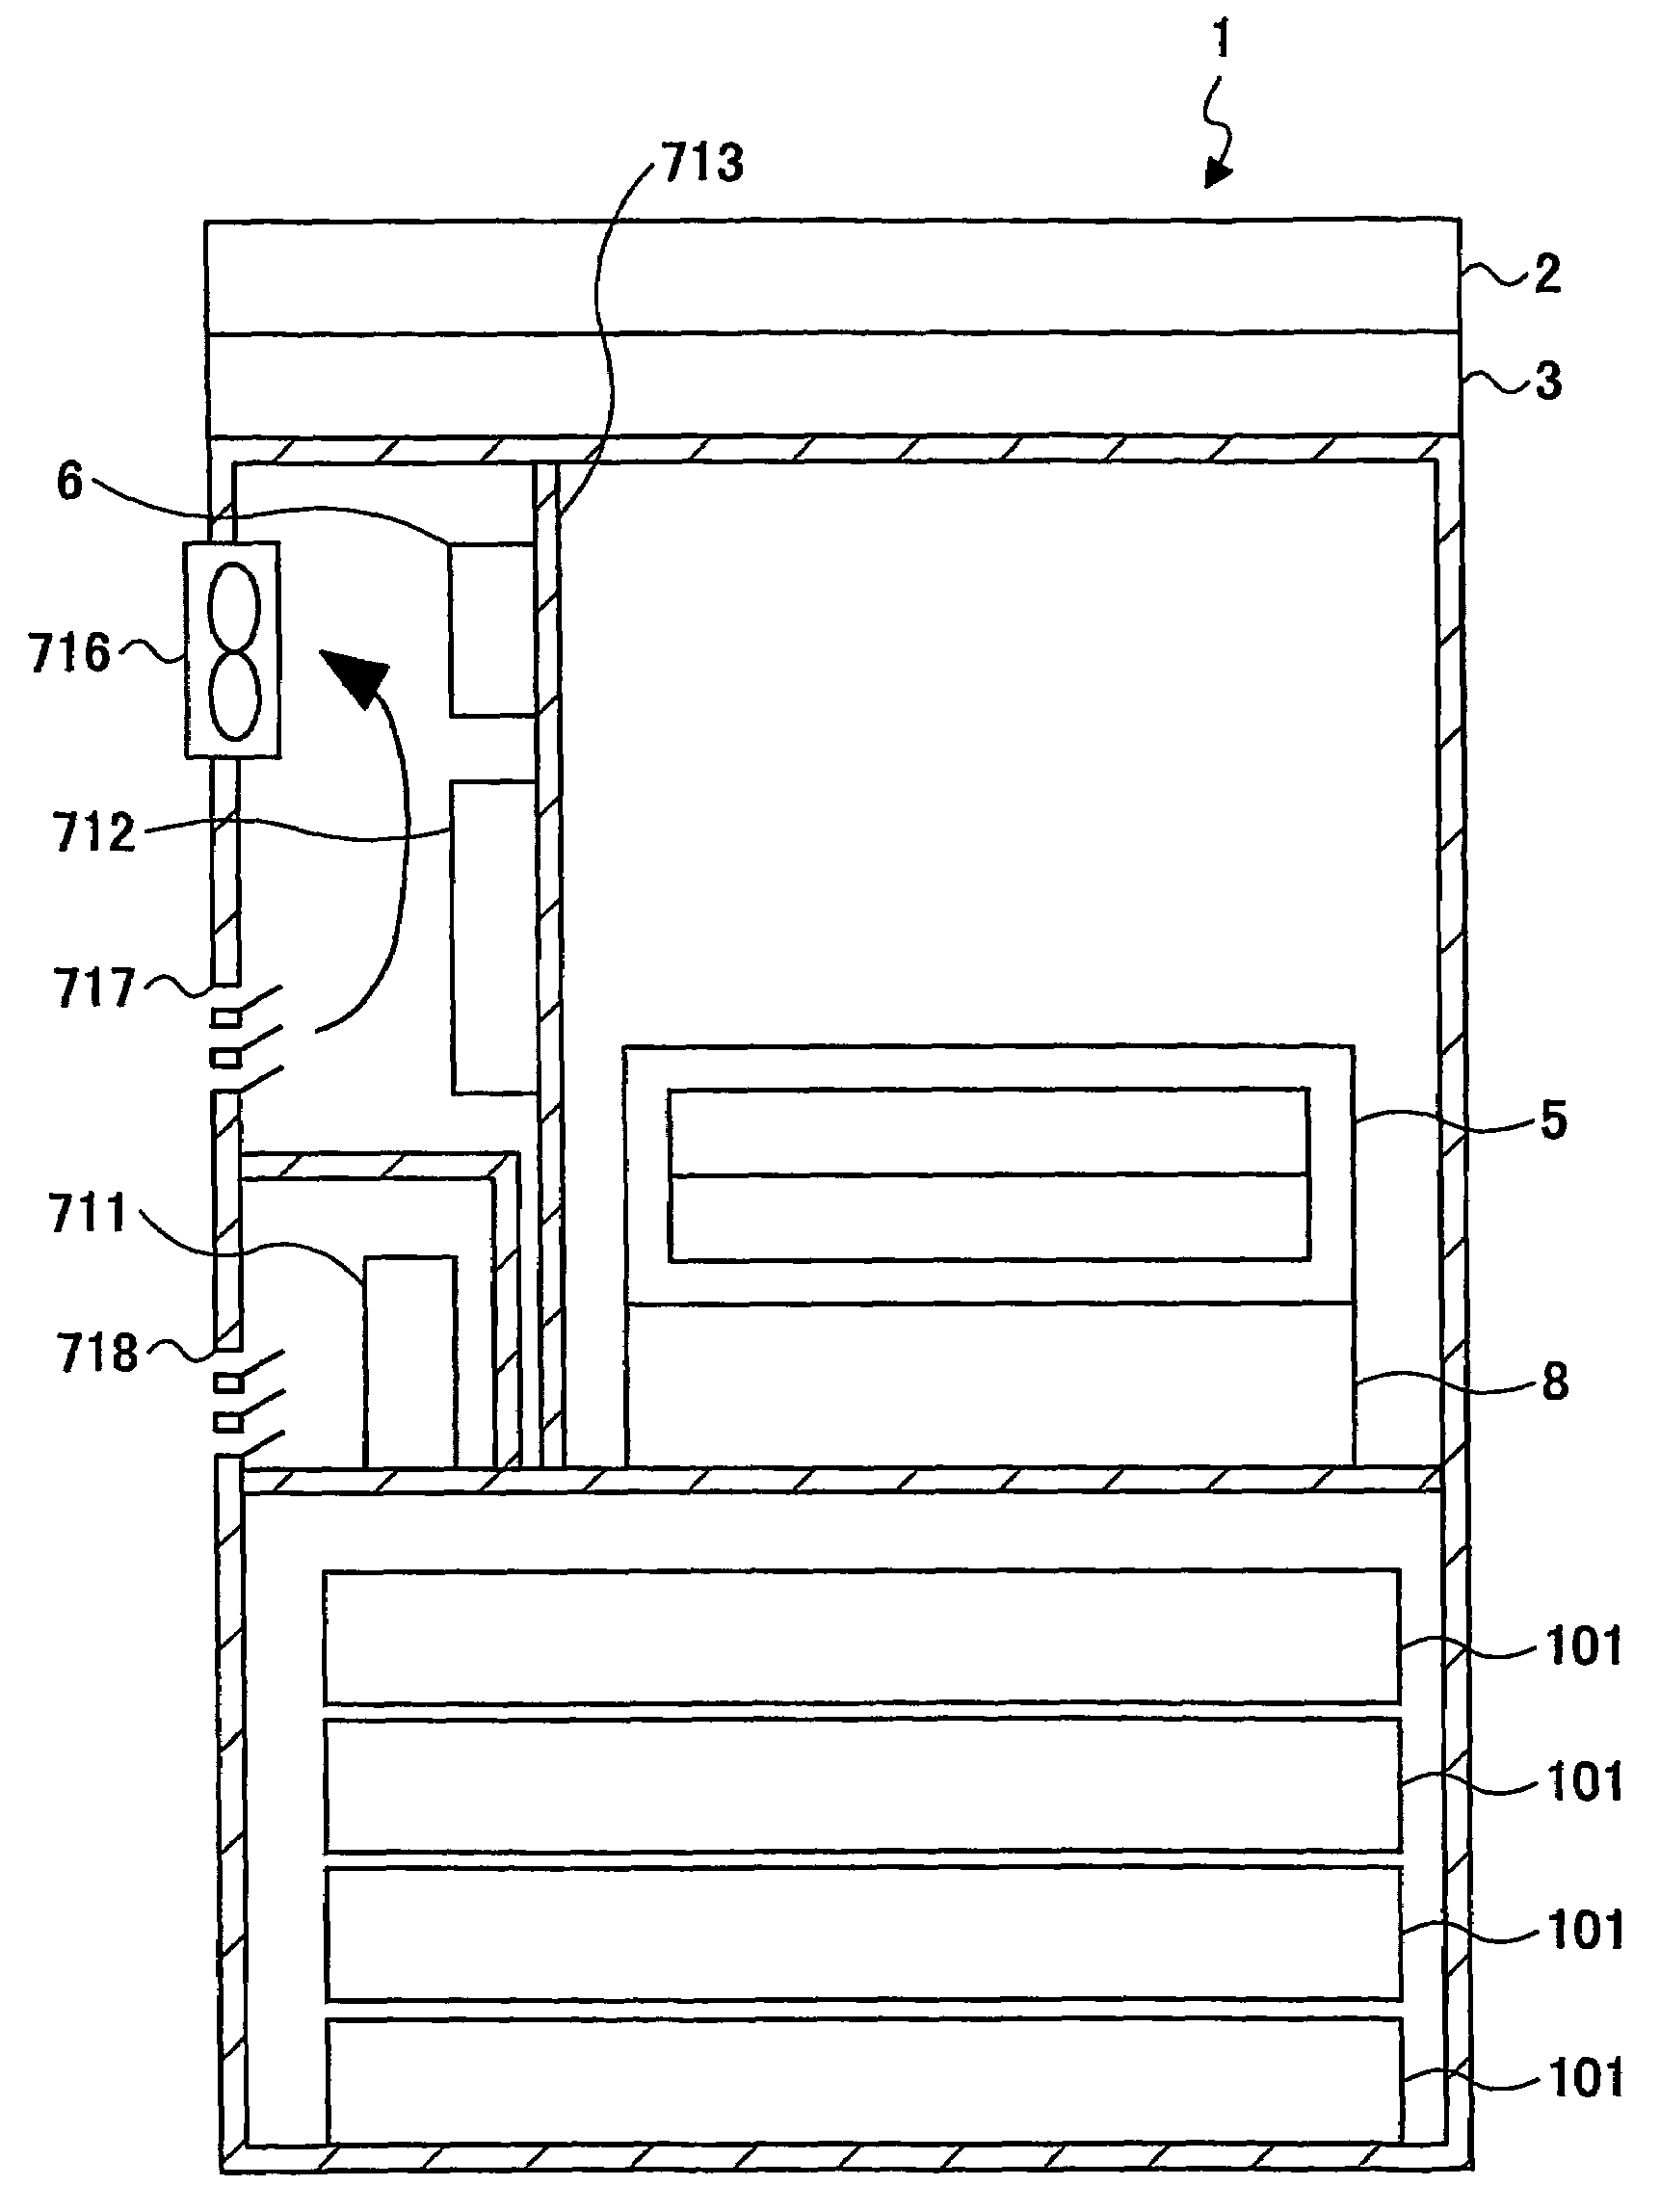 Image forming apparatus with another secondary power supply